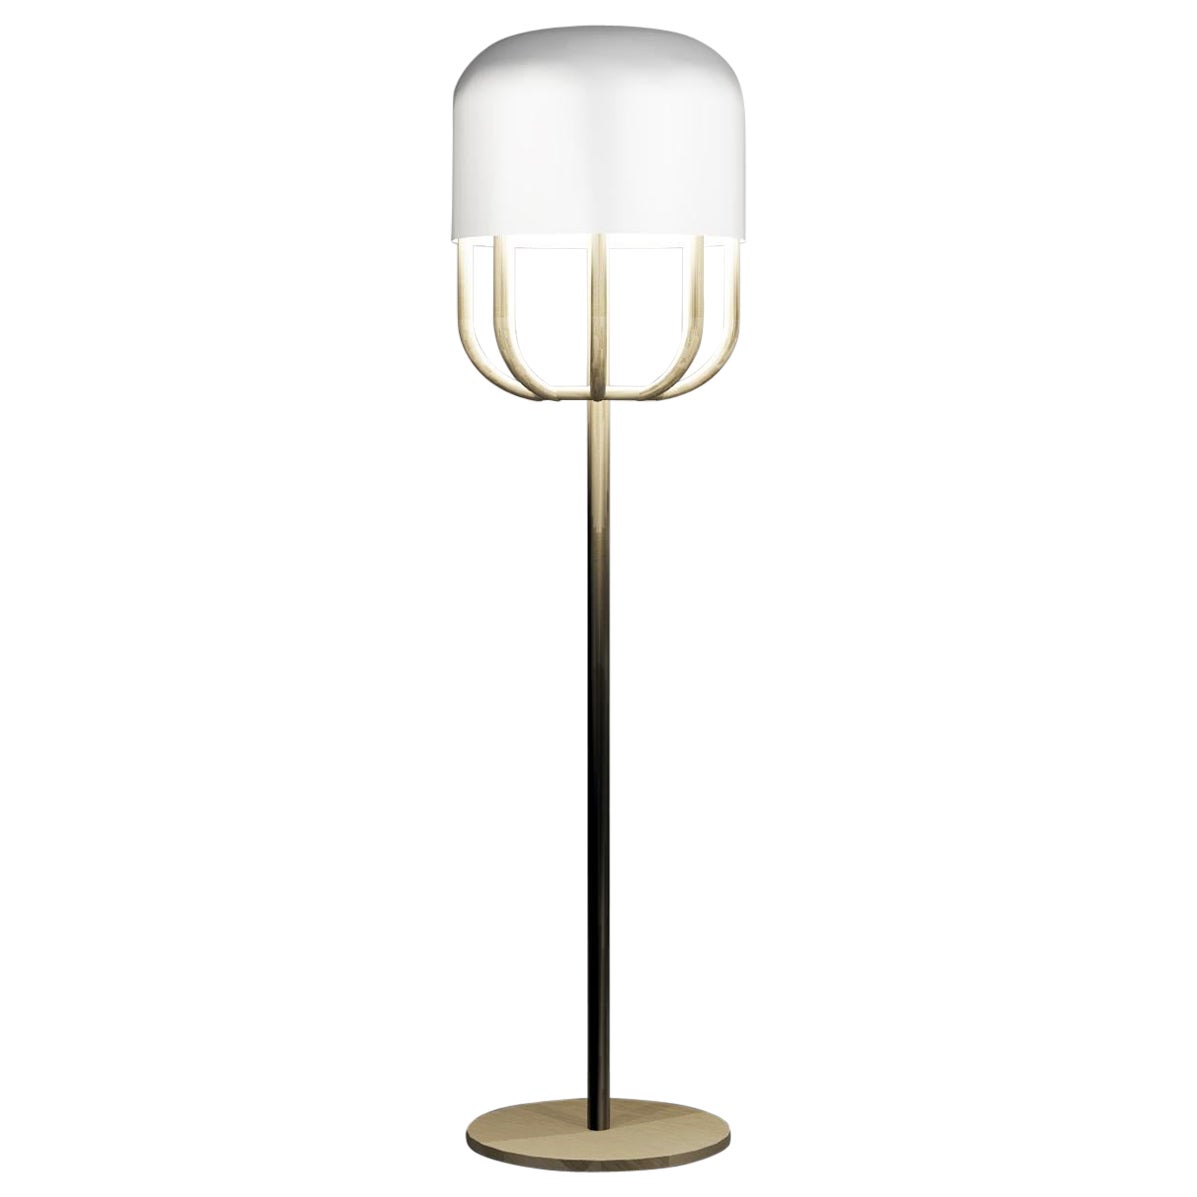 Imagin Capsule Floor Lamp in Powder-coated Metal and Brushed Brass For Sale